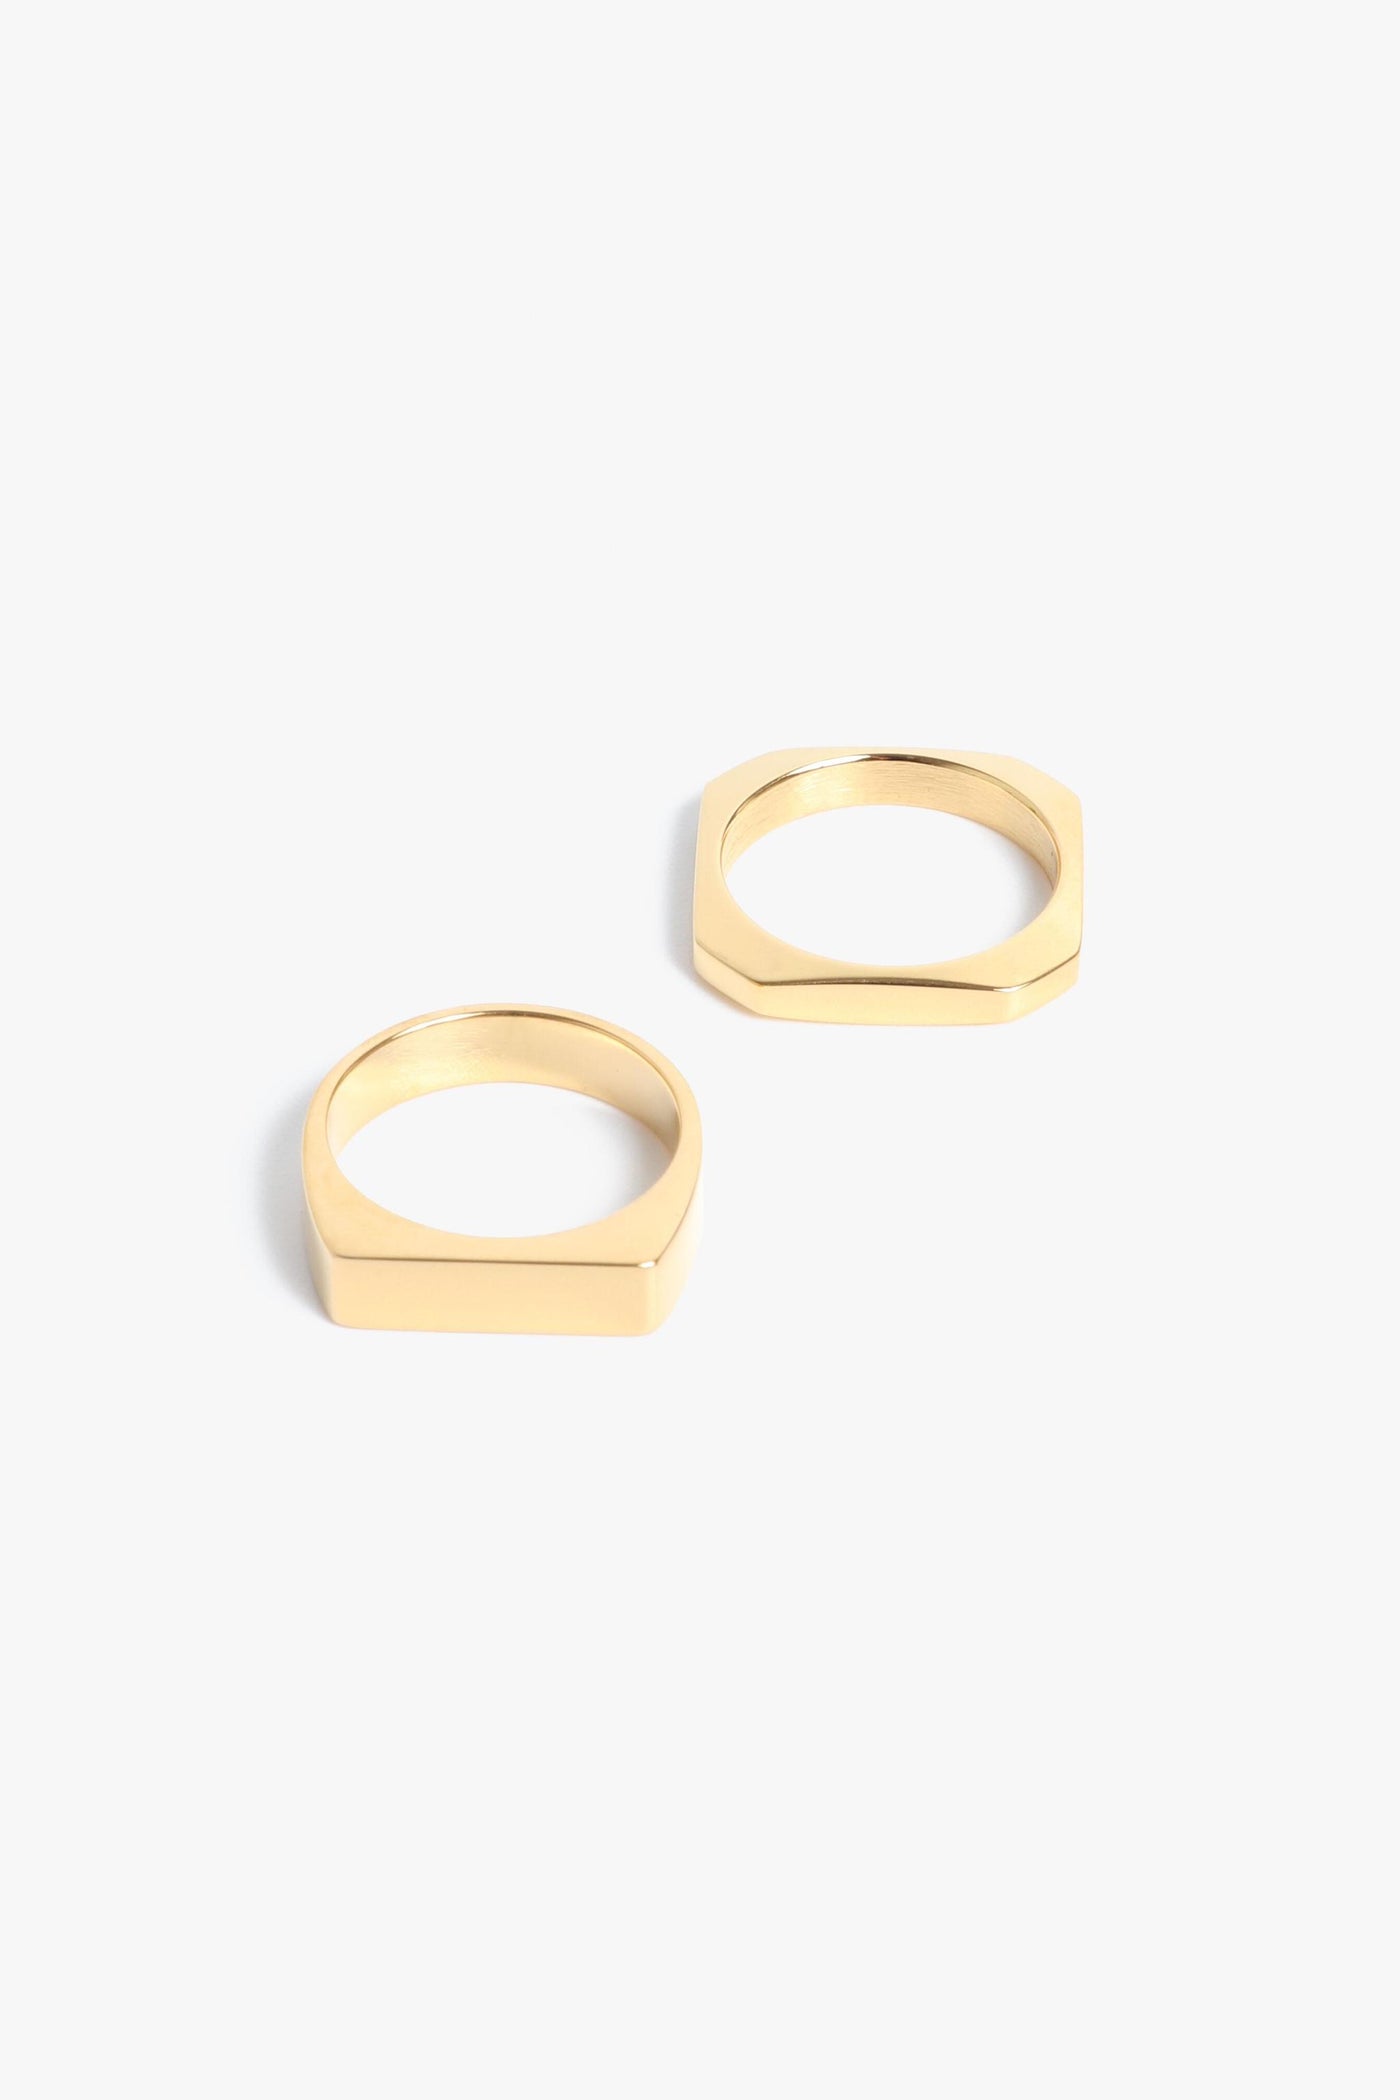 Marrin Costello Jewelry Hendrix Stack geometric signet and quad 2 for 1 ring. Available in sizes 6, 7, 8. Waterproof, sustainable, hypoallergenic. 14k gold plated stainless steel.